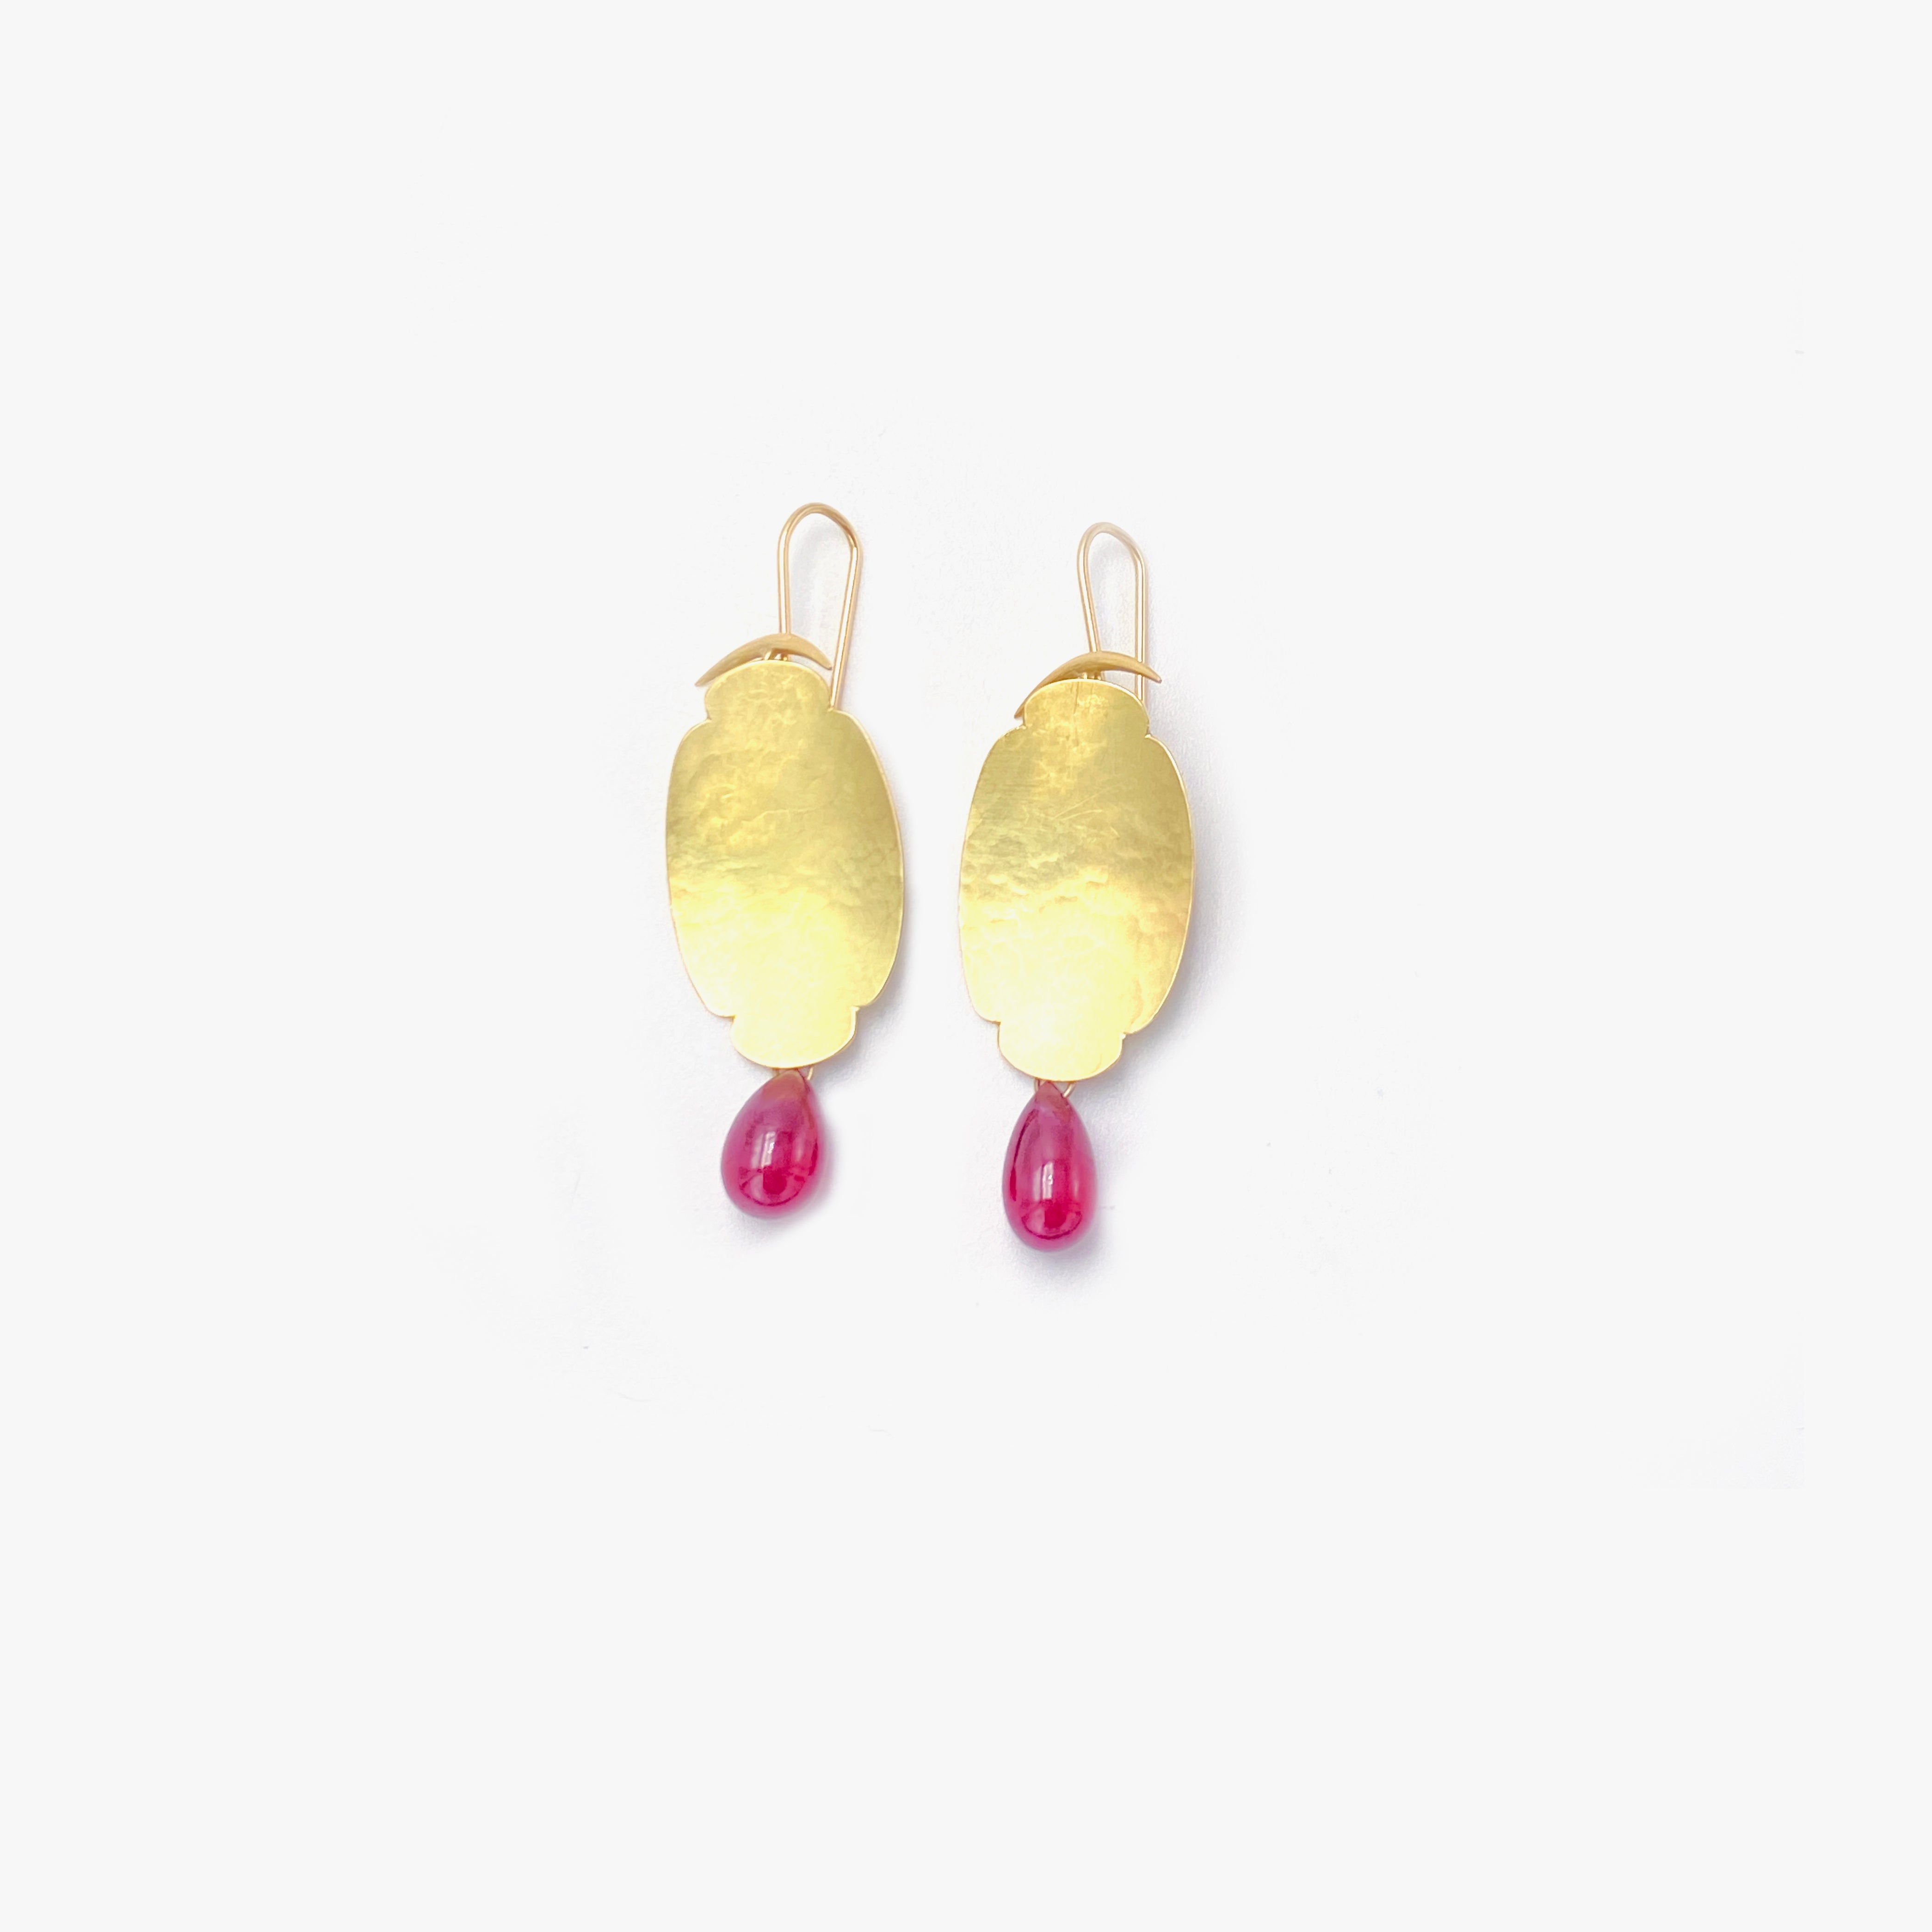 Hammered Scallop Earrings with Ruby Drops